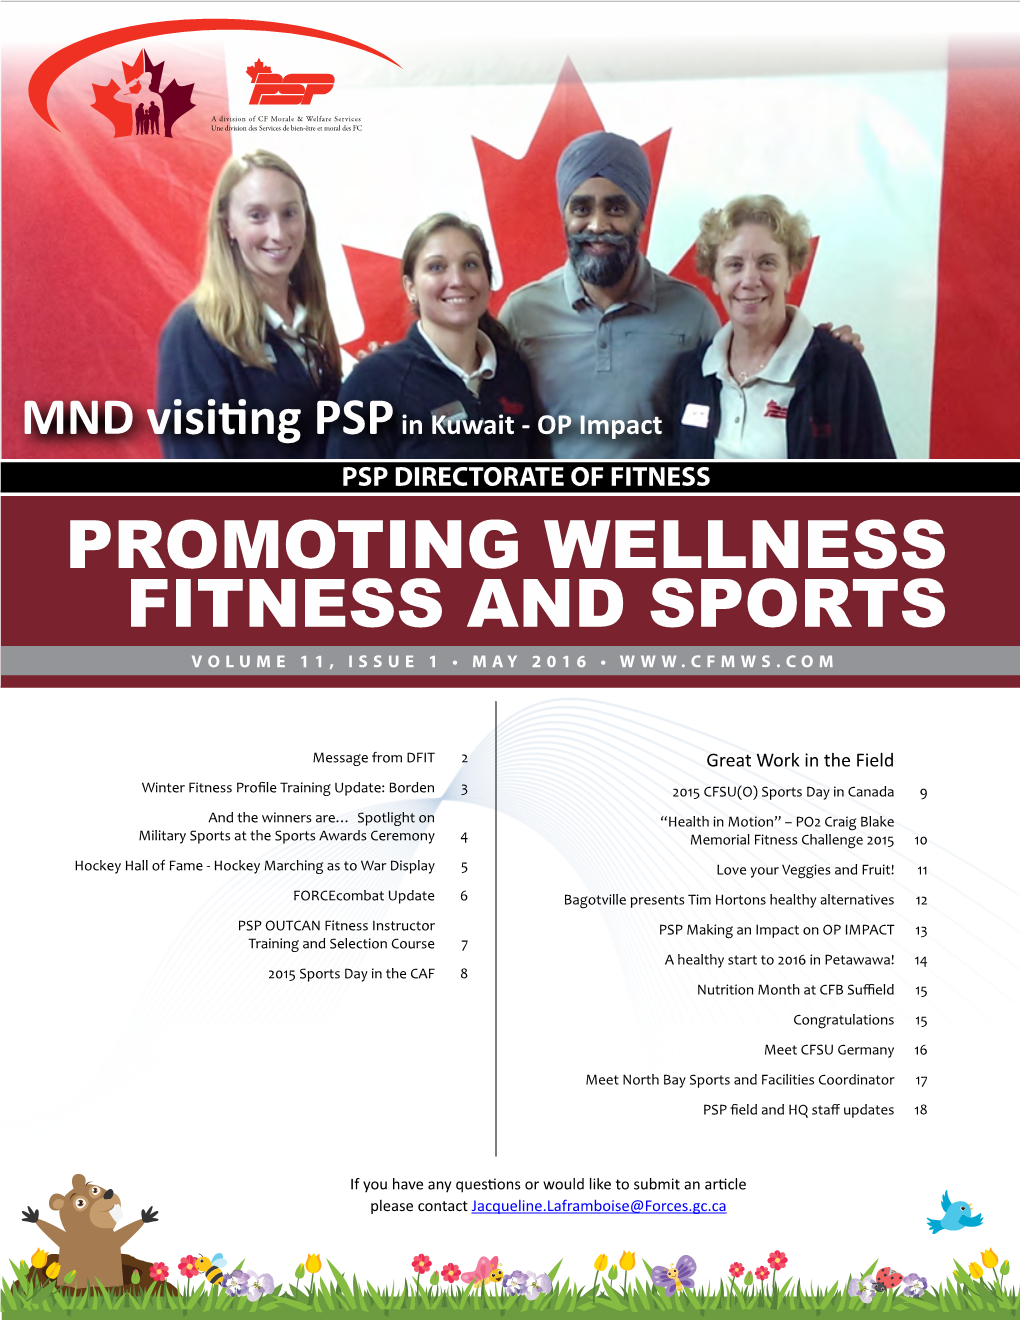 Promoting Wellness Fitness and Sports Volume 11, Issue 1 • May 2016 •